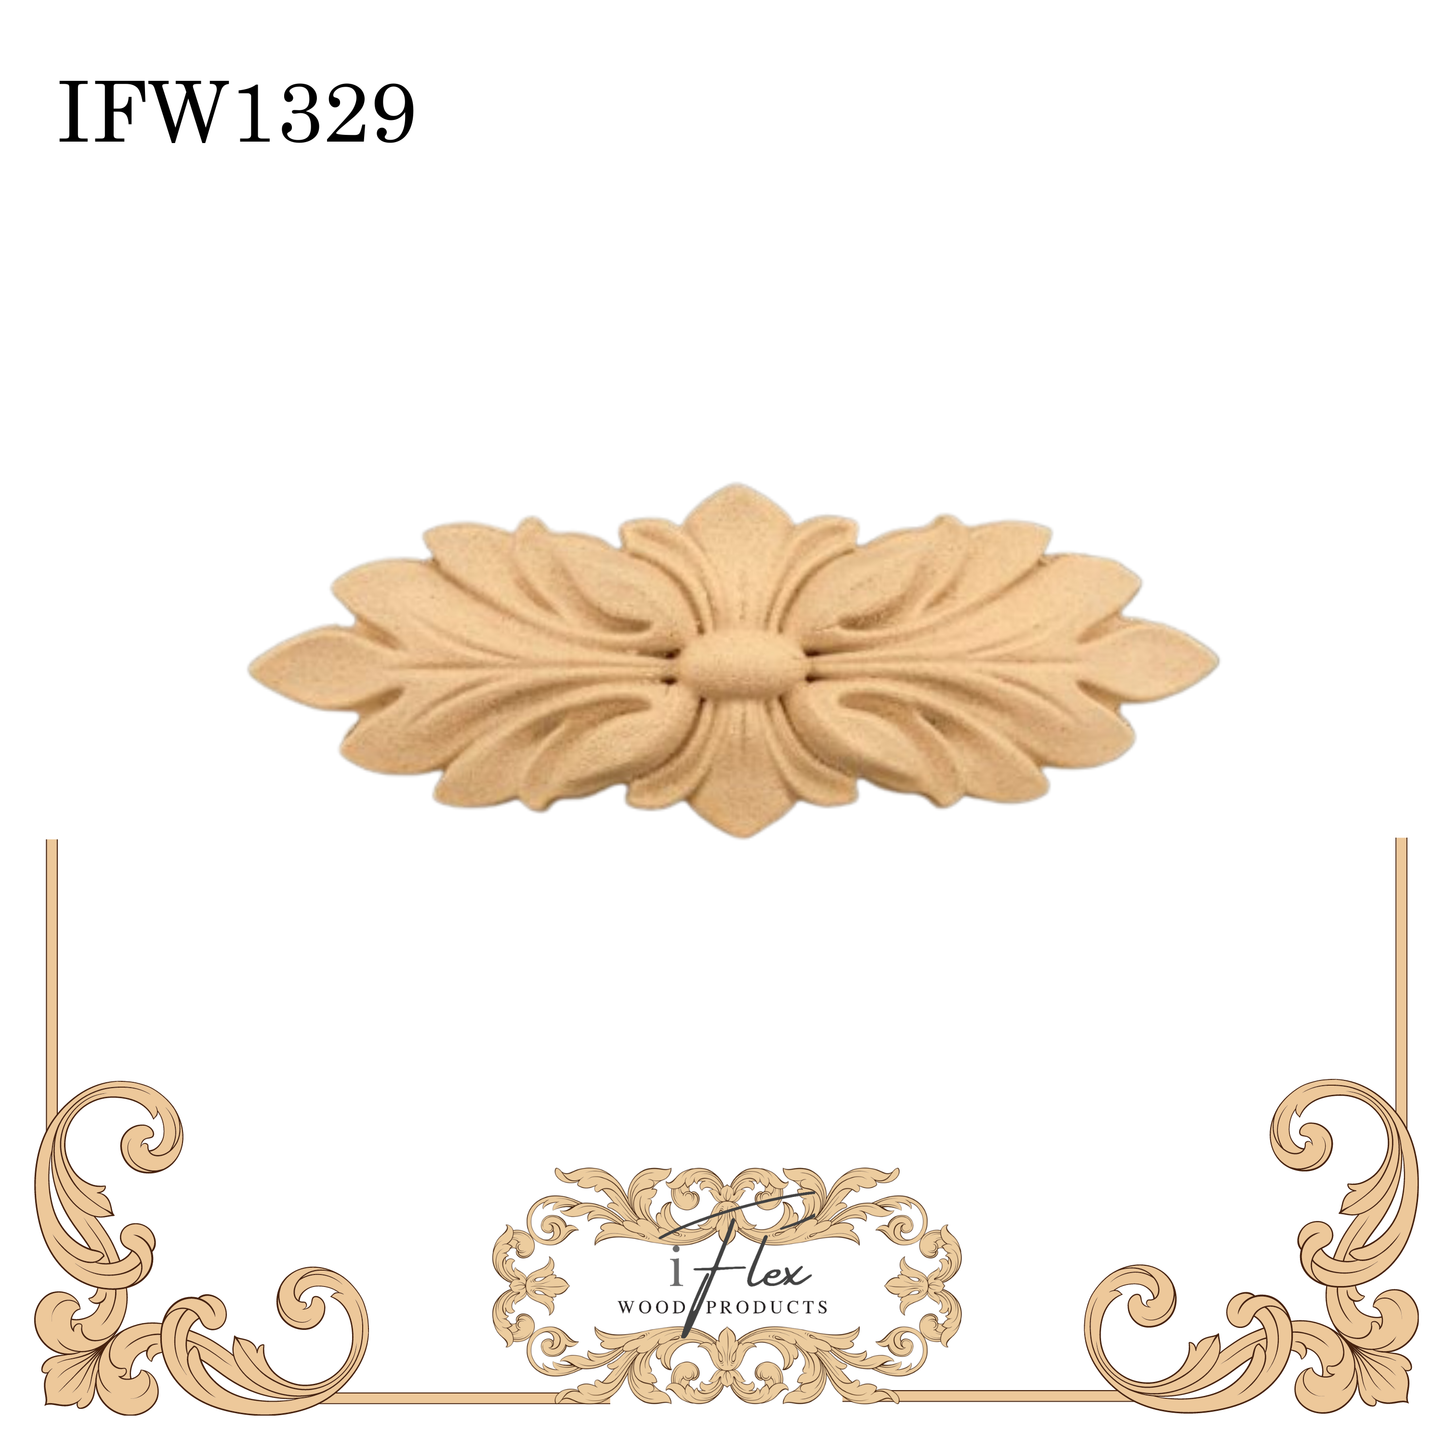 IFW 1329 iFlex Wood Products, bendable mouldings, flexible, wooden appliques, leaf bunch, flower